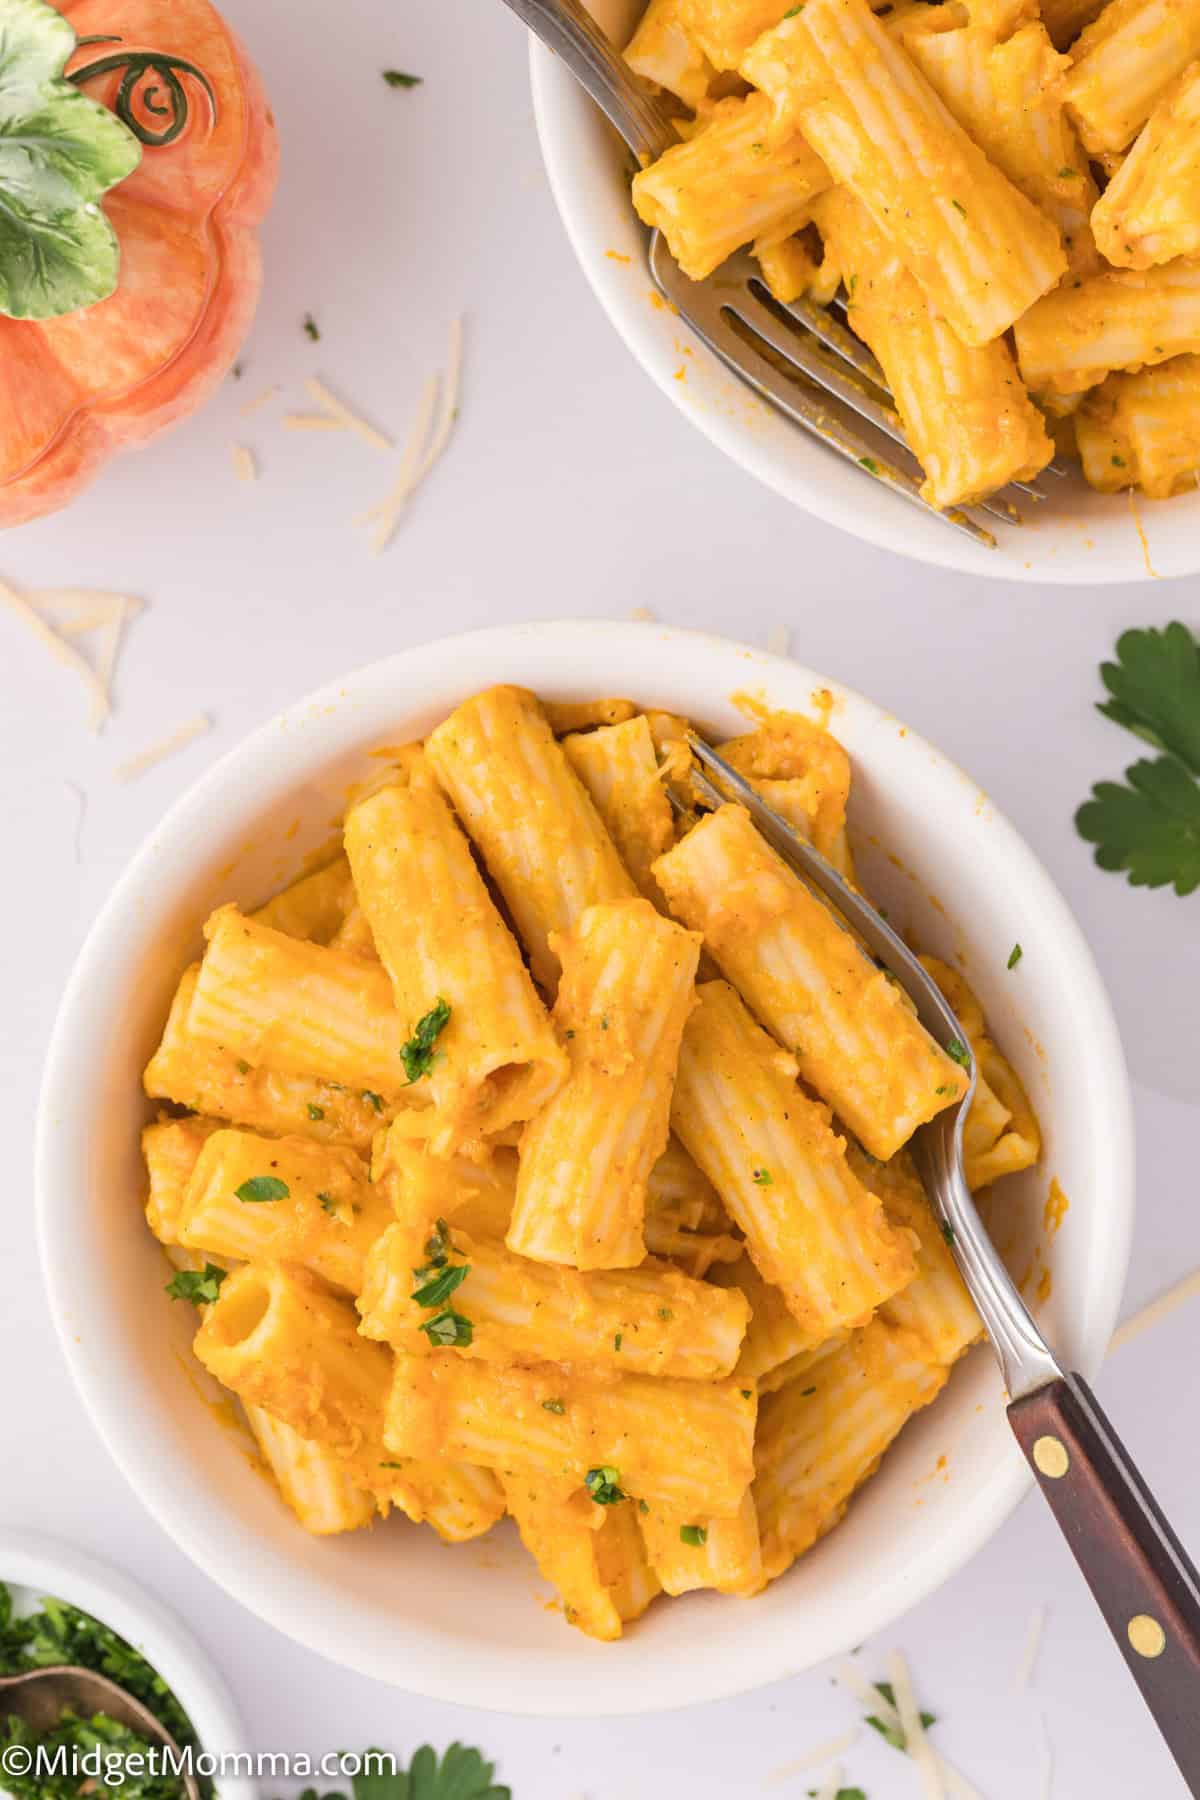 A bowl of creamy rigatoni pasta garnished with parsley, with a fork on the side.